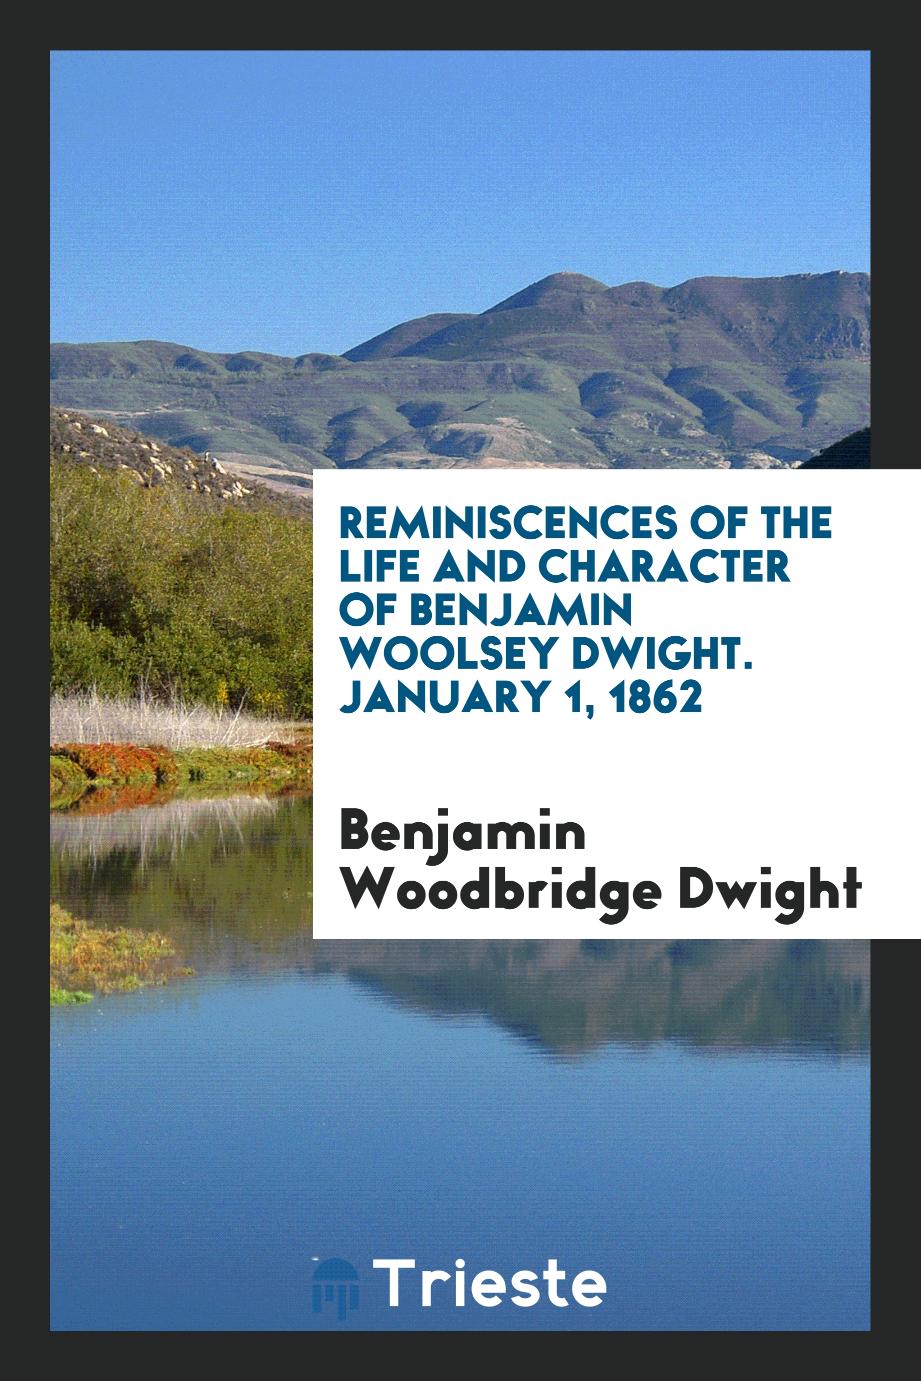 Reminiscences of the Life and Character of Benjamin Woolsey Dwight. January 1, 1862